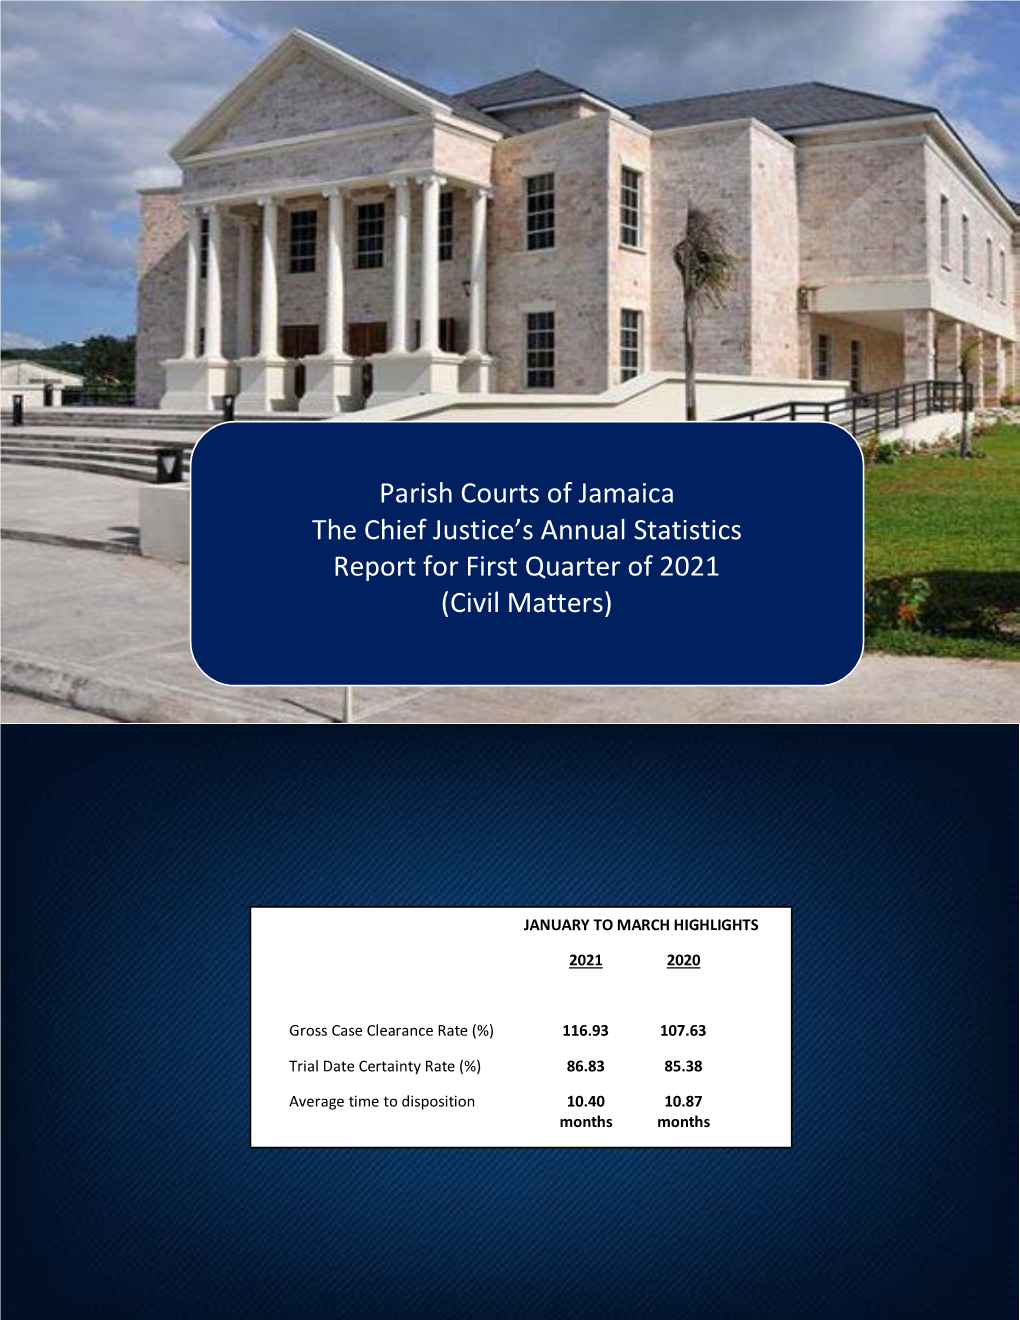 The Chief Justice's Statistics Report for First Quarter of 2021 (Civil Matters)